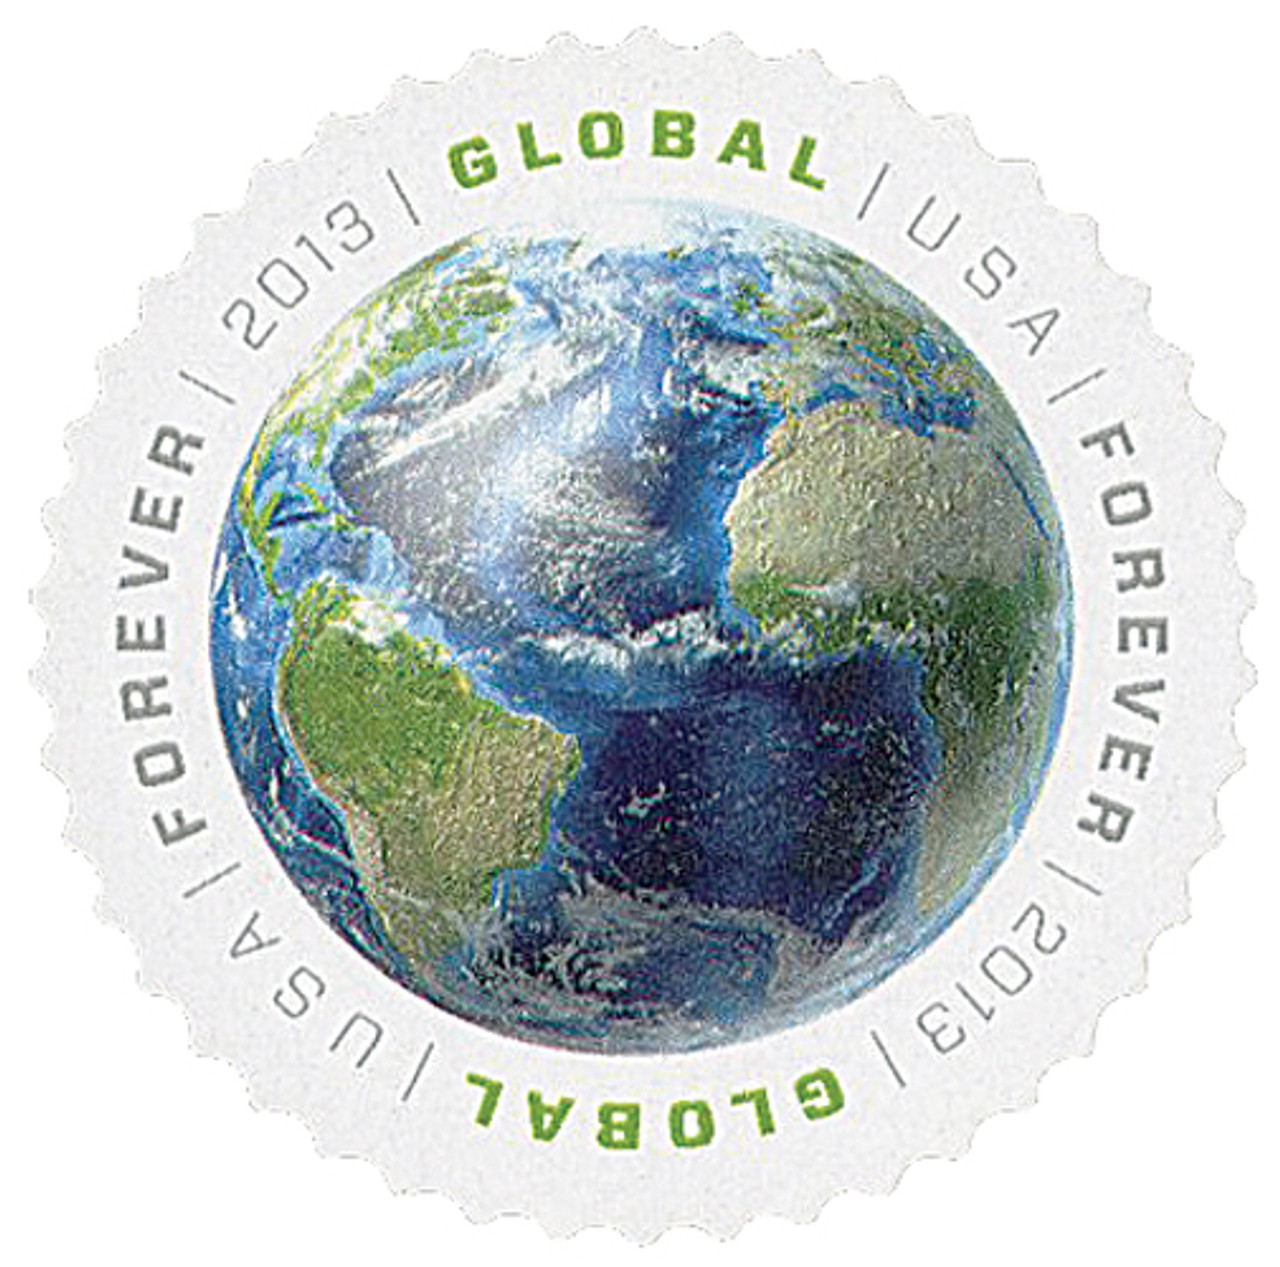 13 Forever Stamps, 1 $26.35 Stamp, 3 $5 Stamps and 16 Global Forever Stamps  LOOK